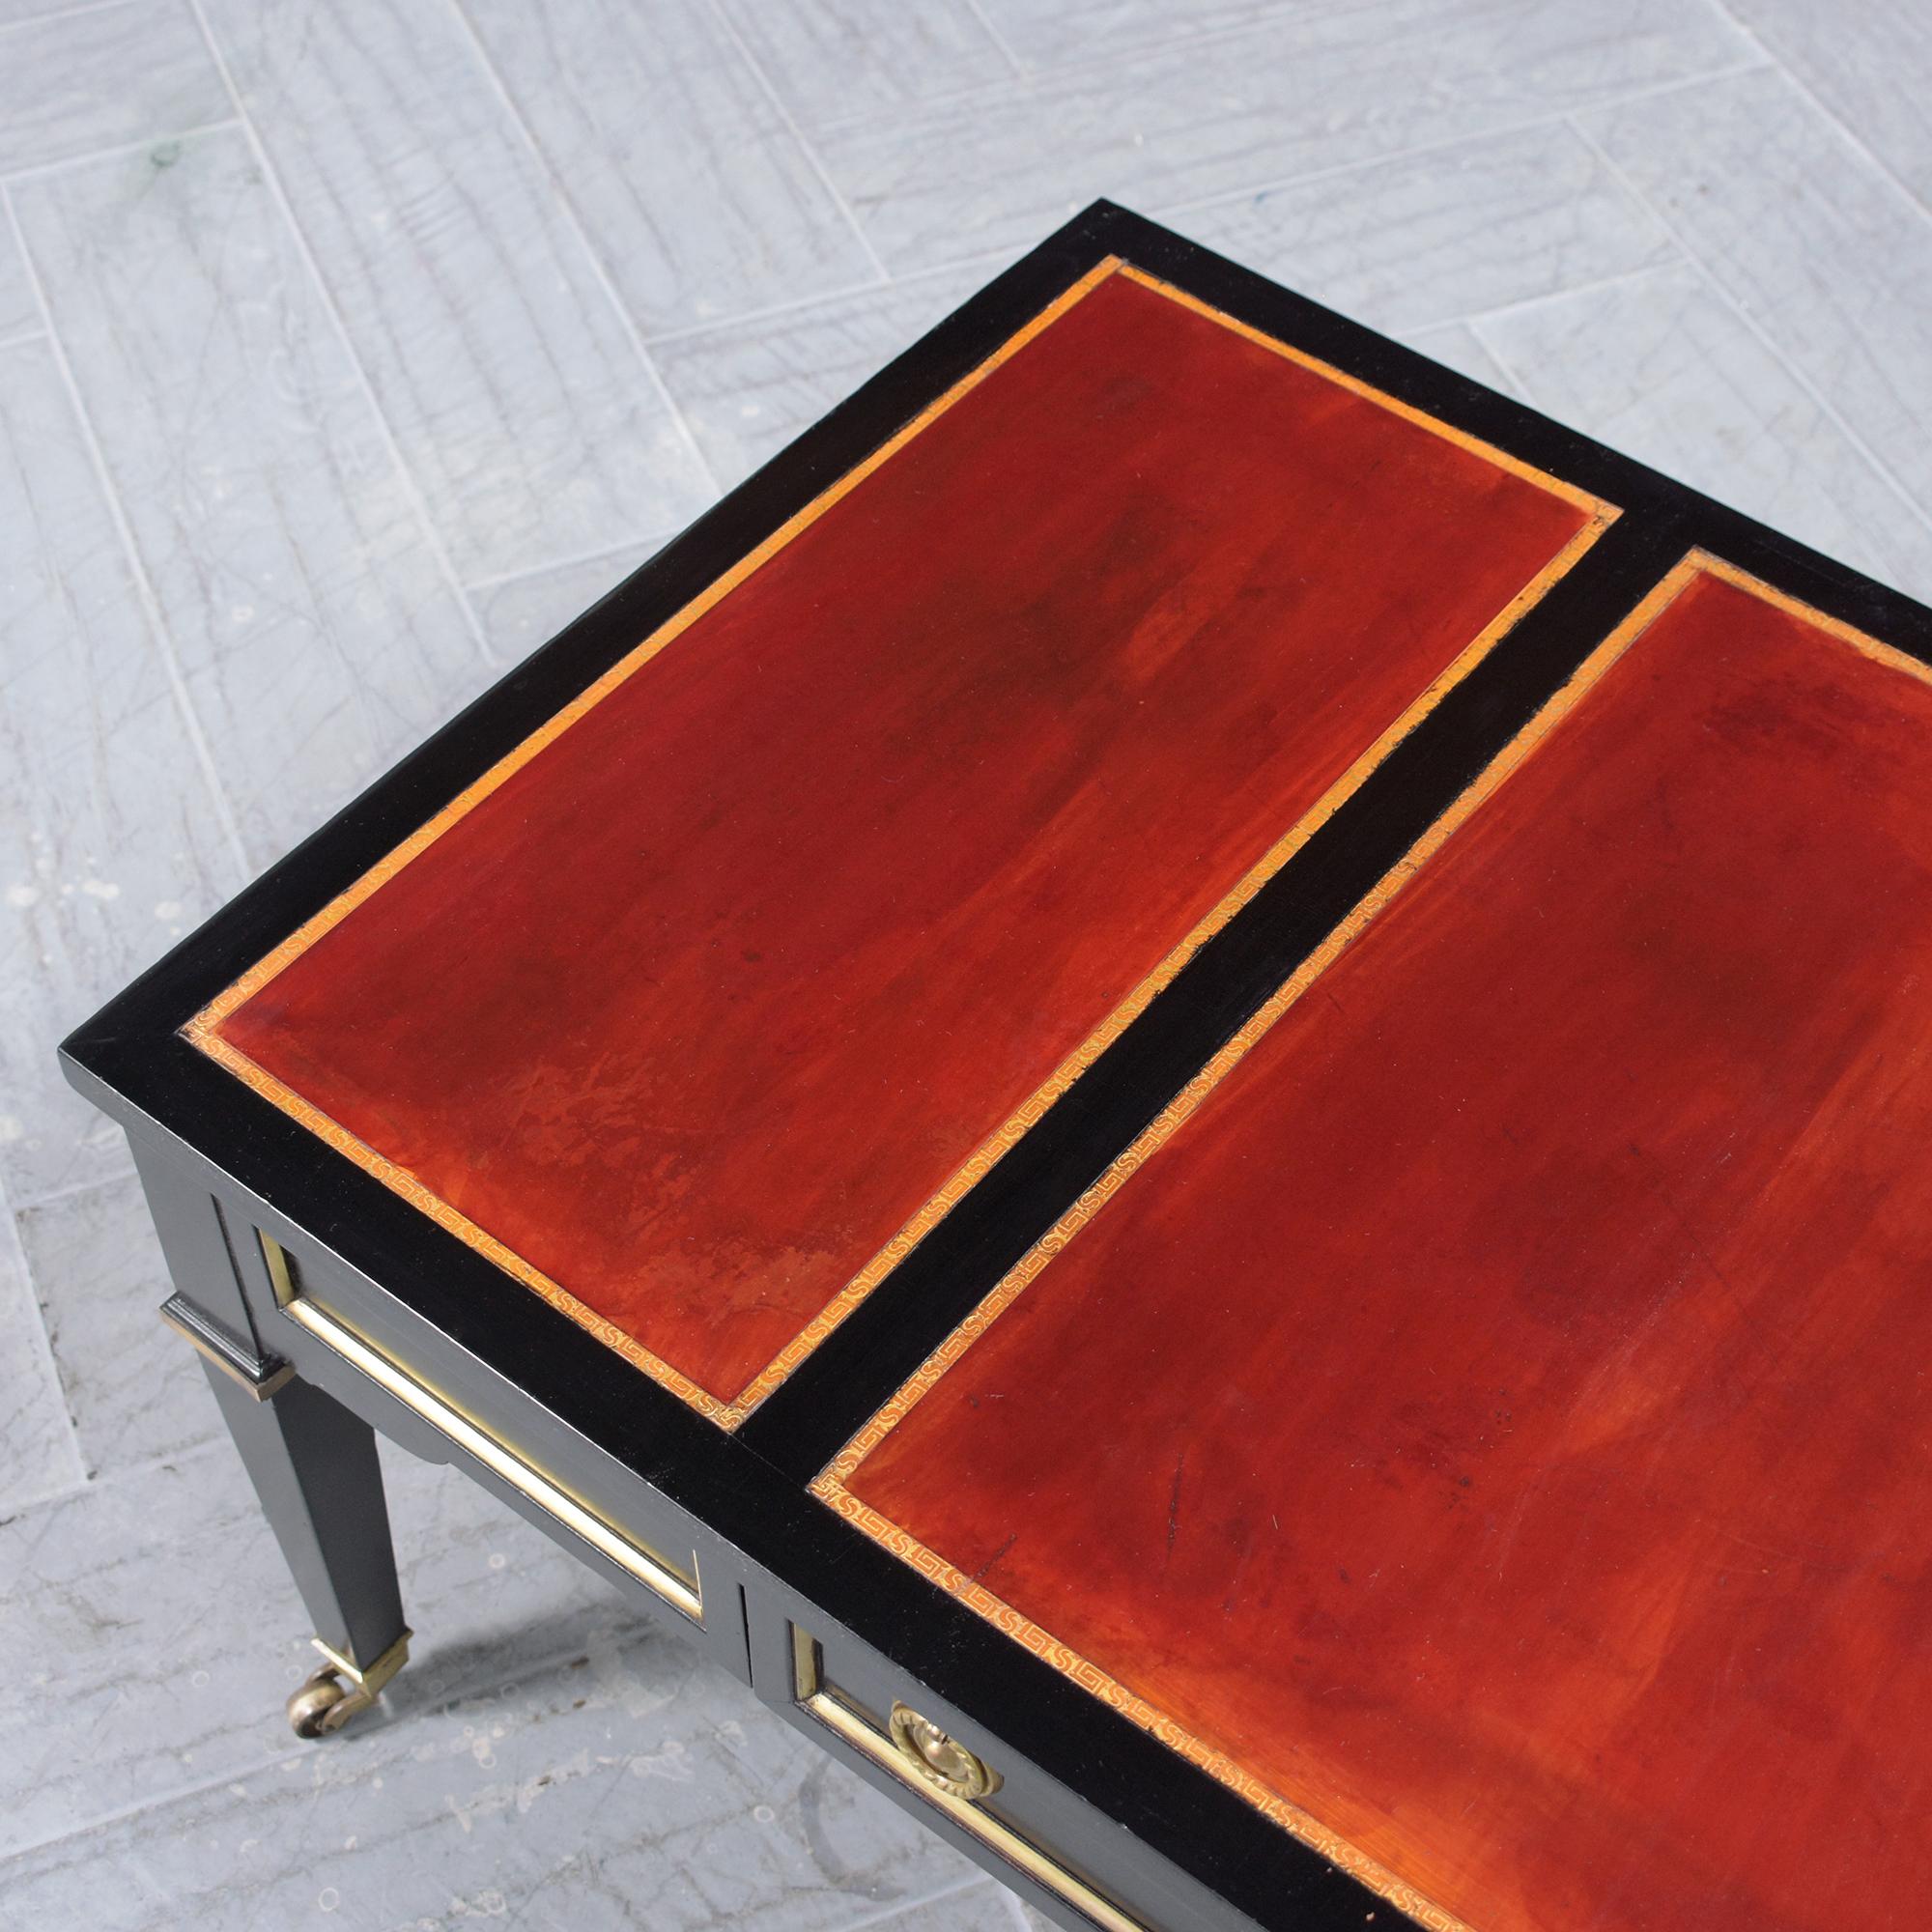 Hollywood Regency-Style Coffee Table by Heritage Henredon: 1960s Luxury For Sale 4